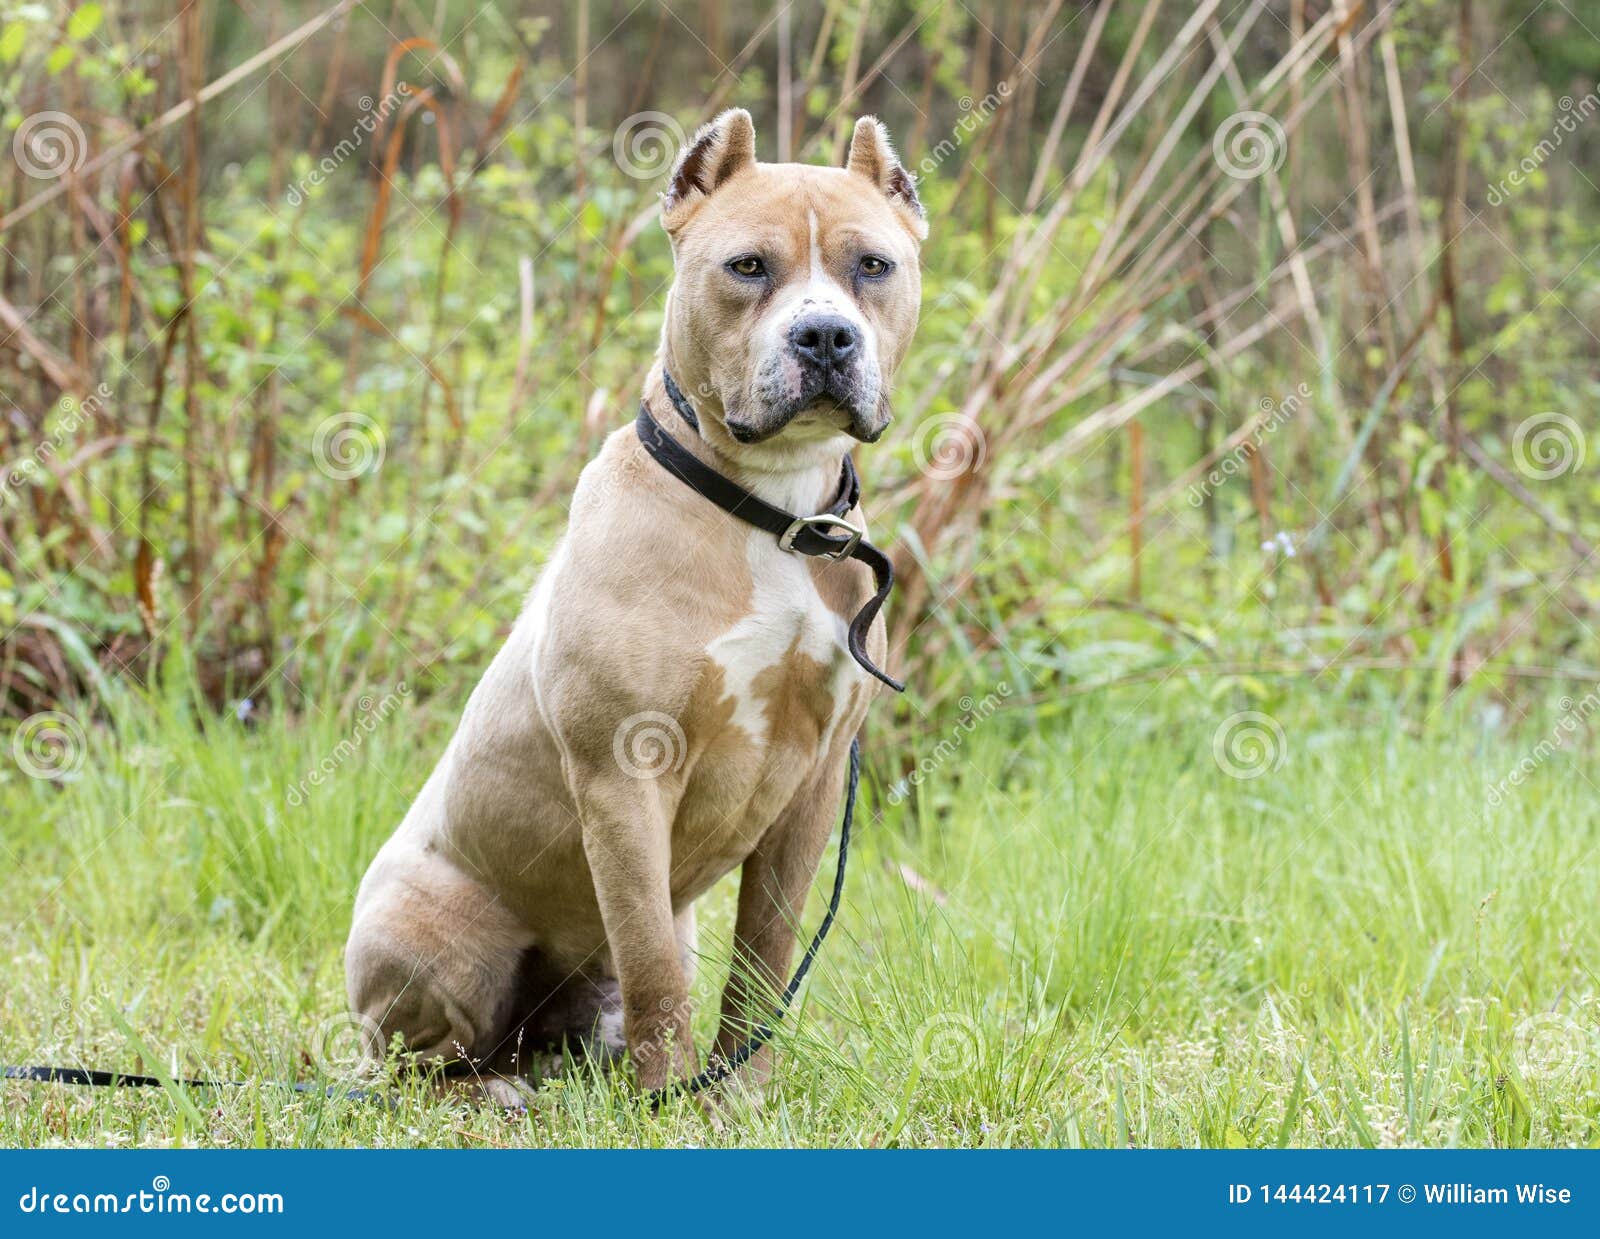 Tan American Pit Bull Terrier Dog With Cropped Ears Stock Image Image Of Society Rescue 144424117